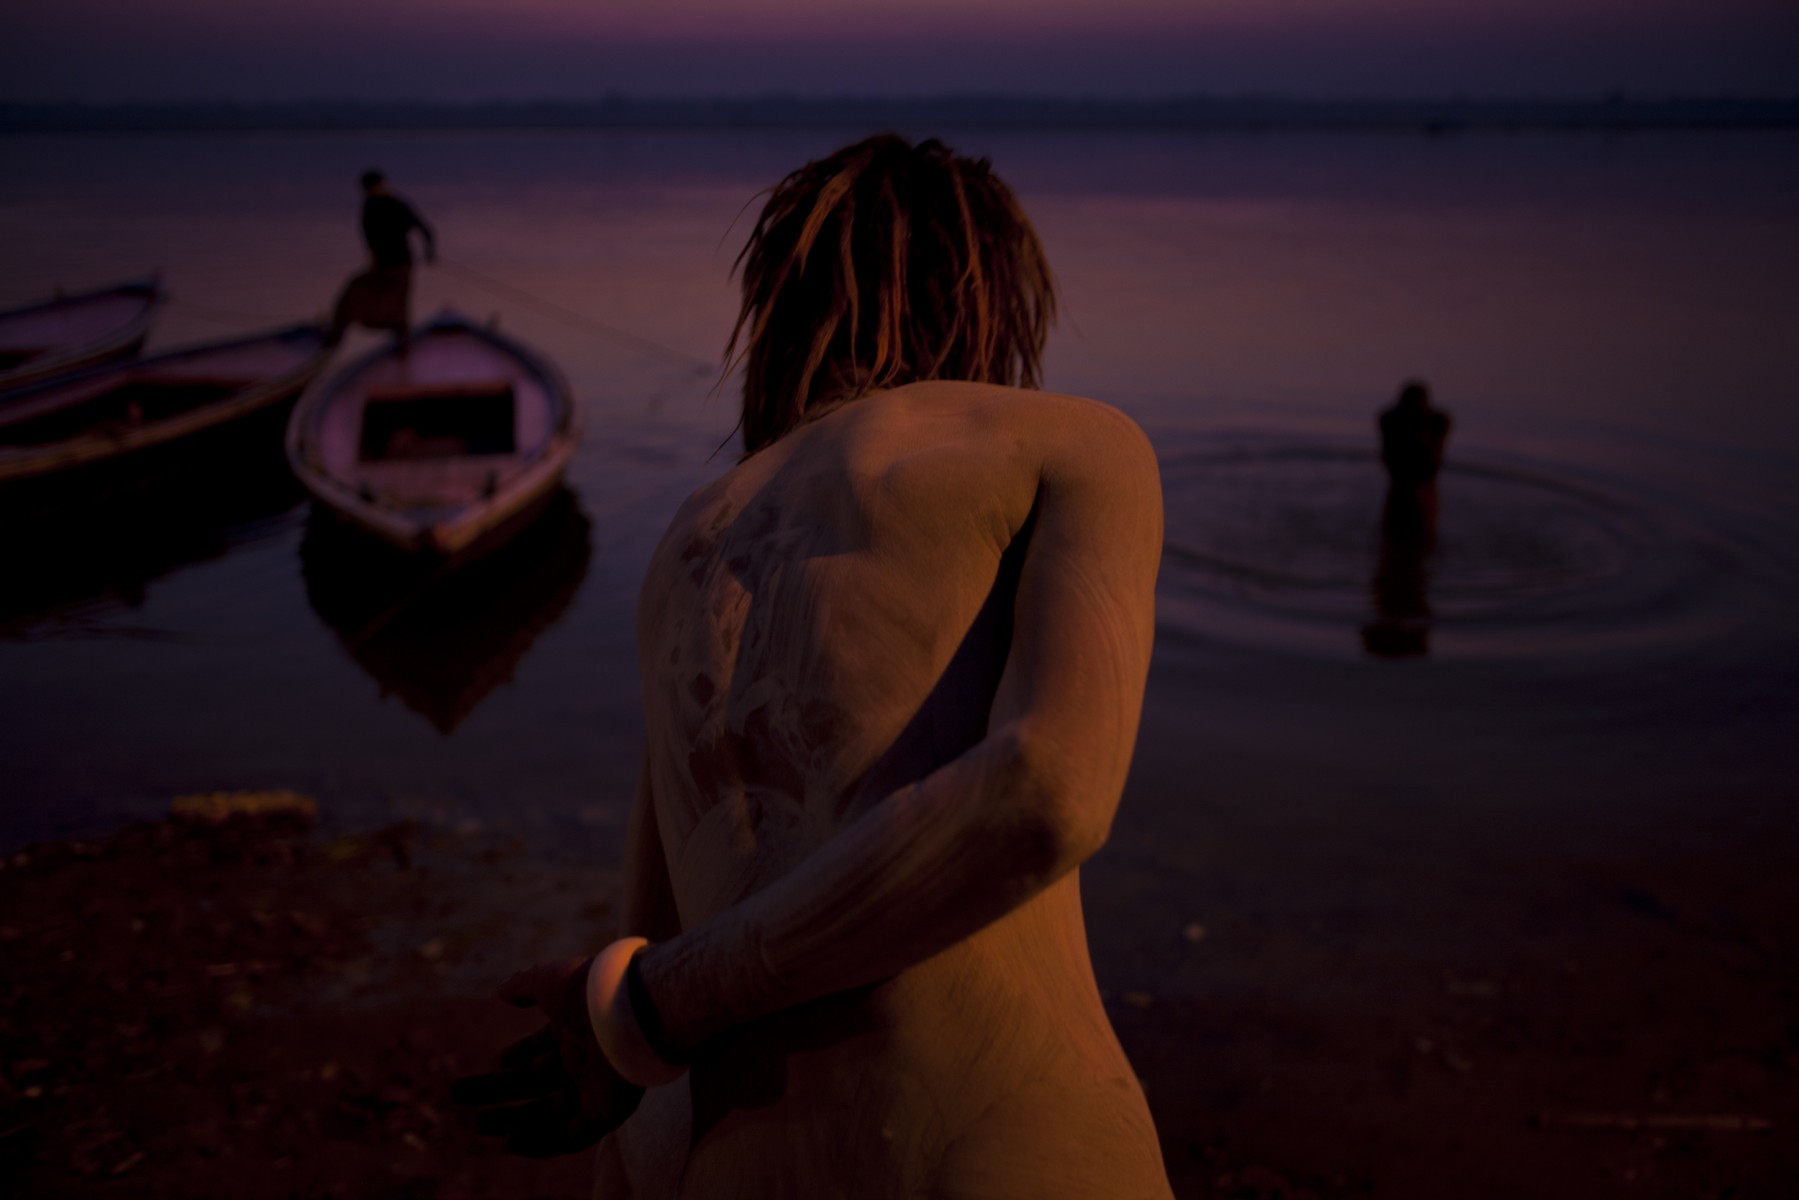 Bathing ritual by the Ganges